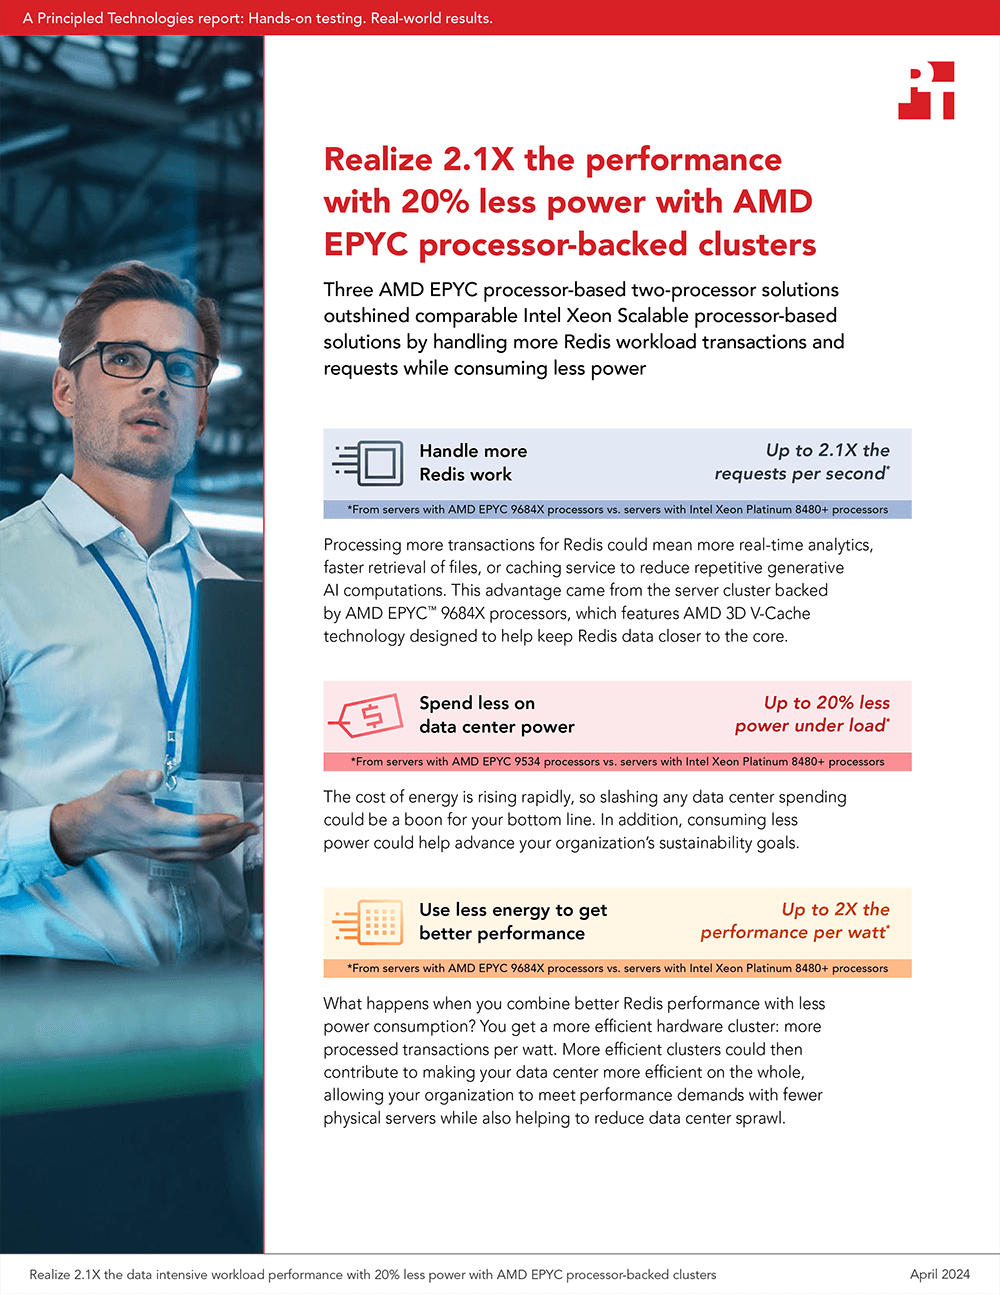 AMD EPYC 9004 Series Processor-Based Servers Delivered Better Redis Performance and Used Less Power Than Competing Solutions in Tests